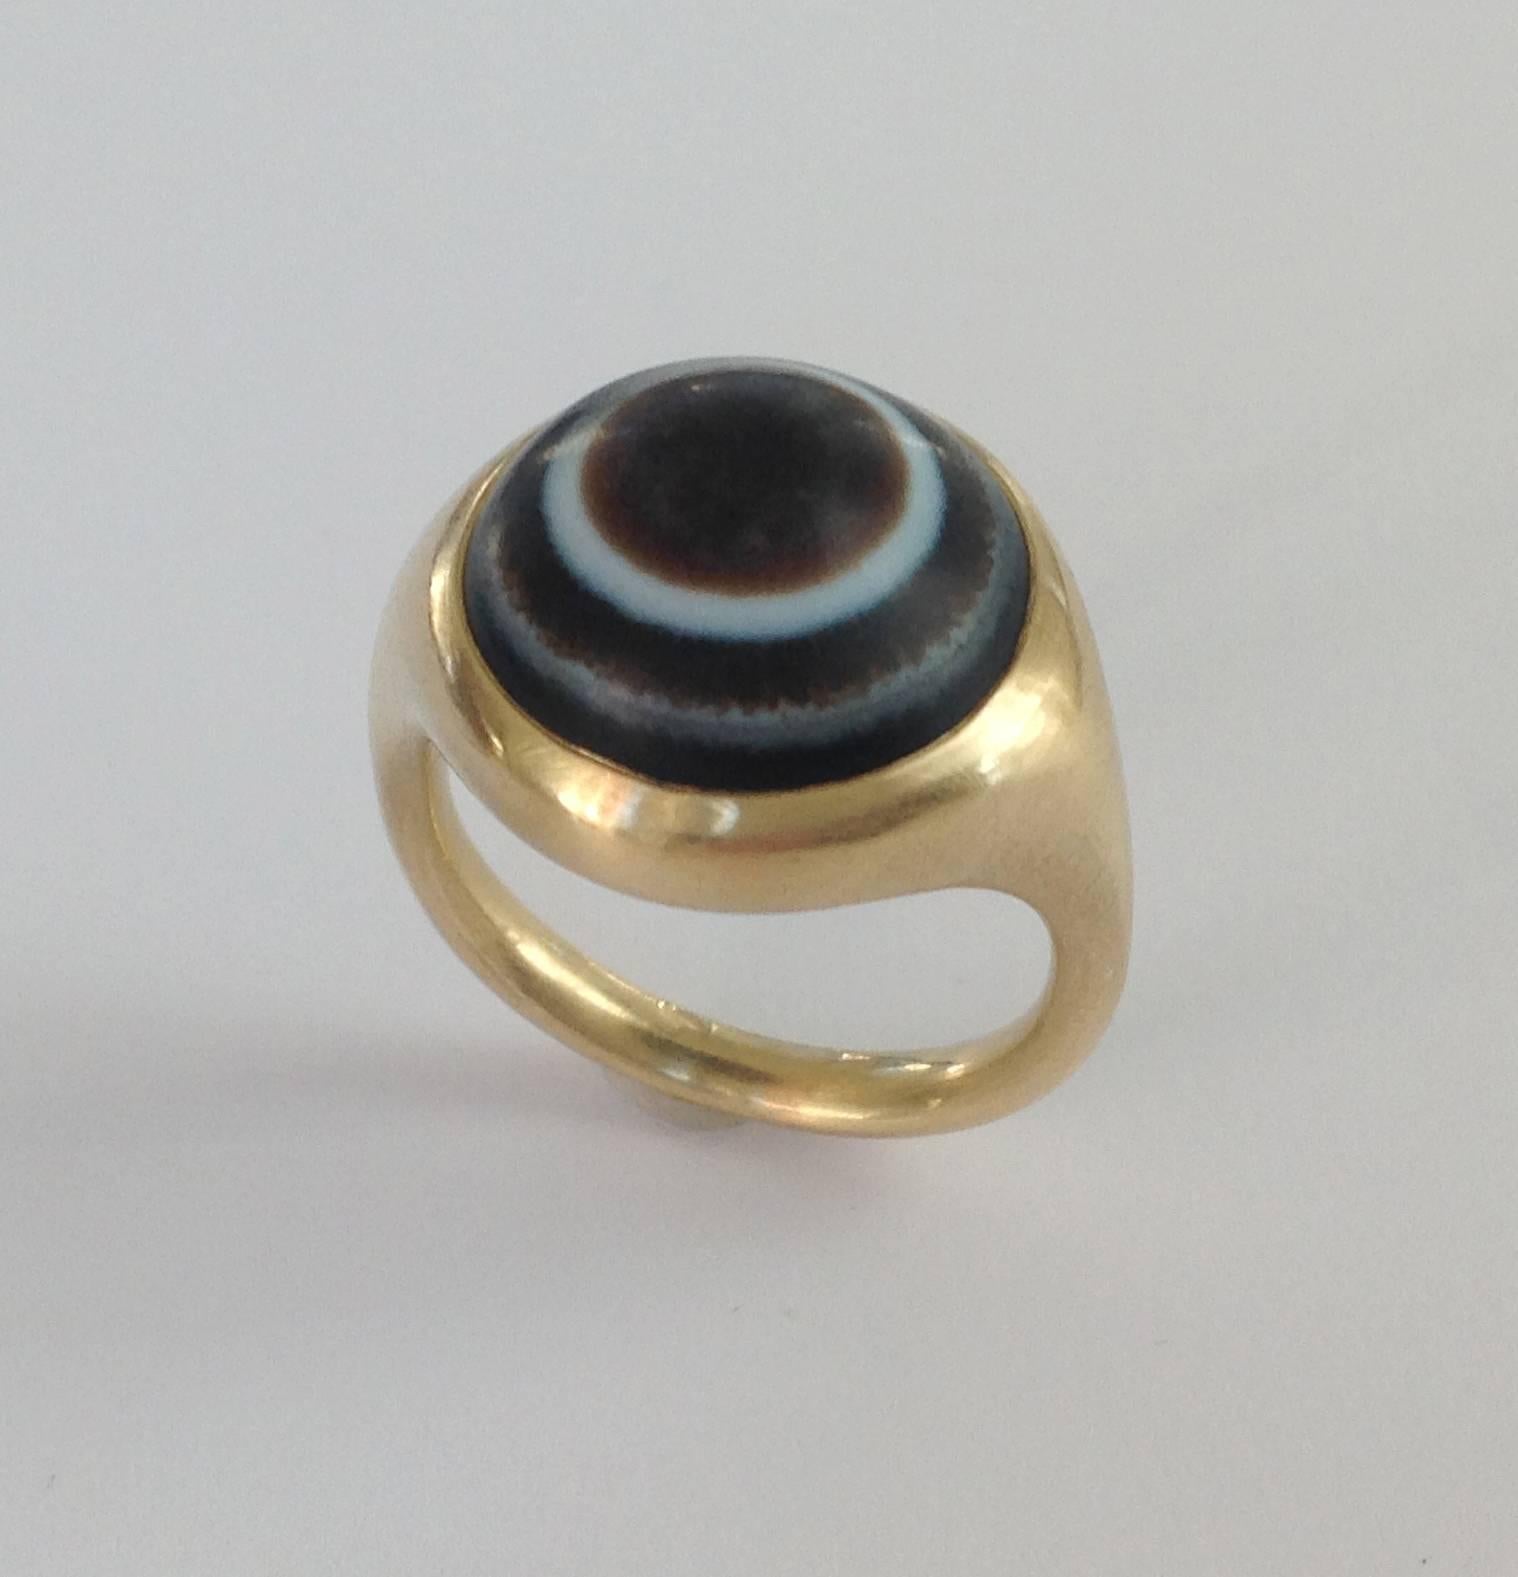 Dalben design unisex one of a kind 18k yellow gold satin finishing ring with a 7,10 carat bezel-set dark brown and white banded round agate. size 6 3/4 USA - 54 EU re-sizable to most finger sizes. The Ring has been designed and handcrafted in our